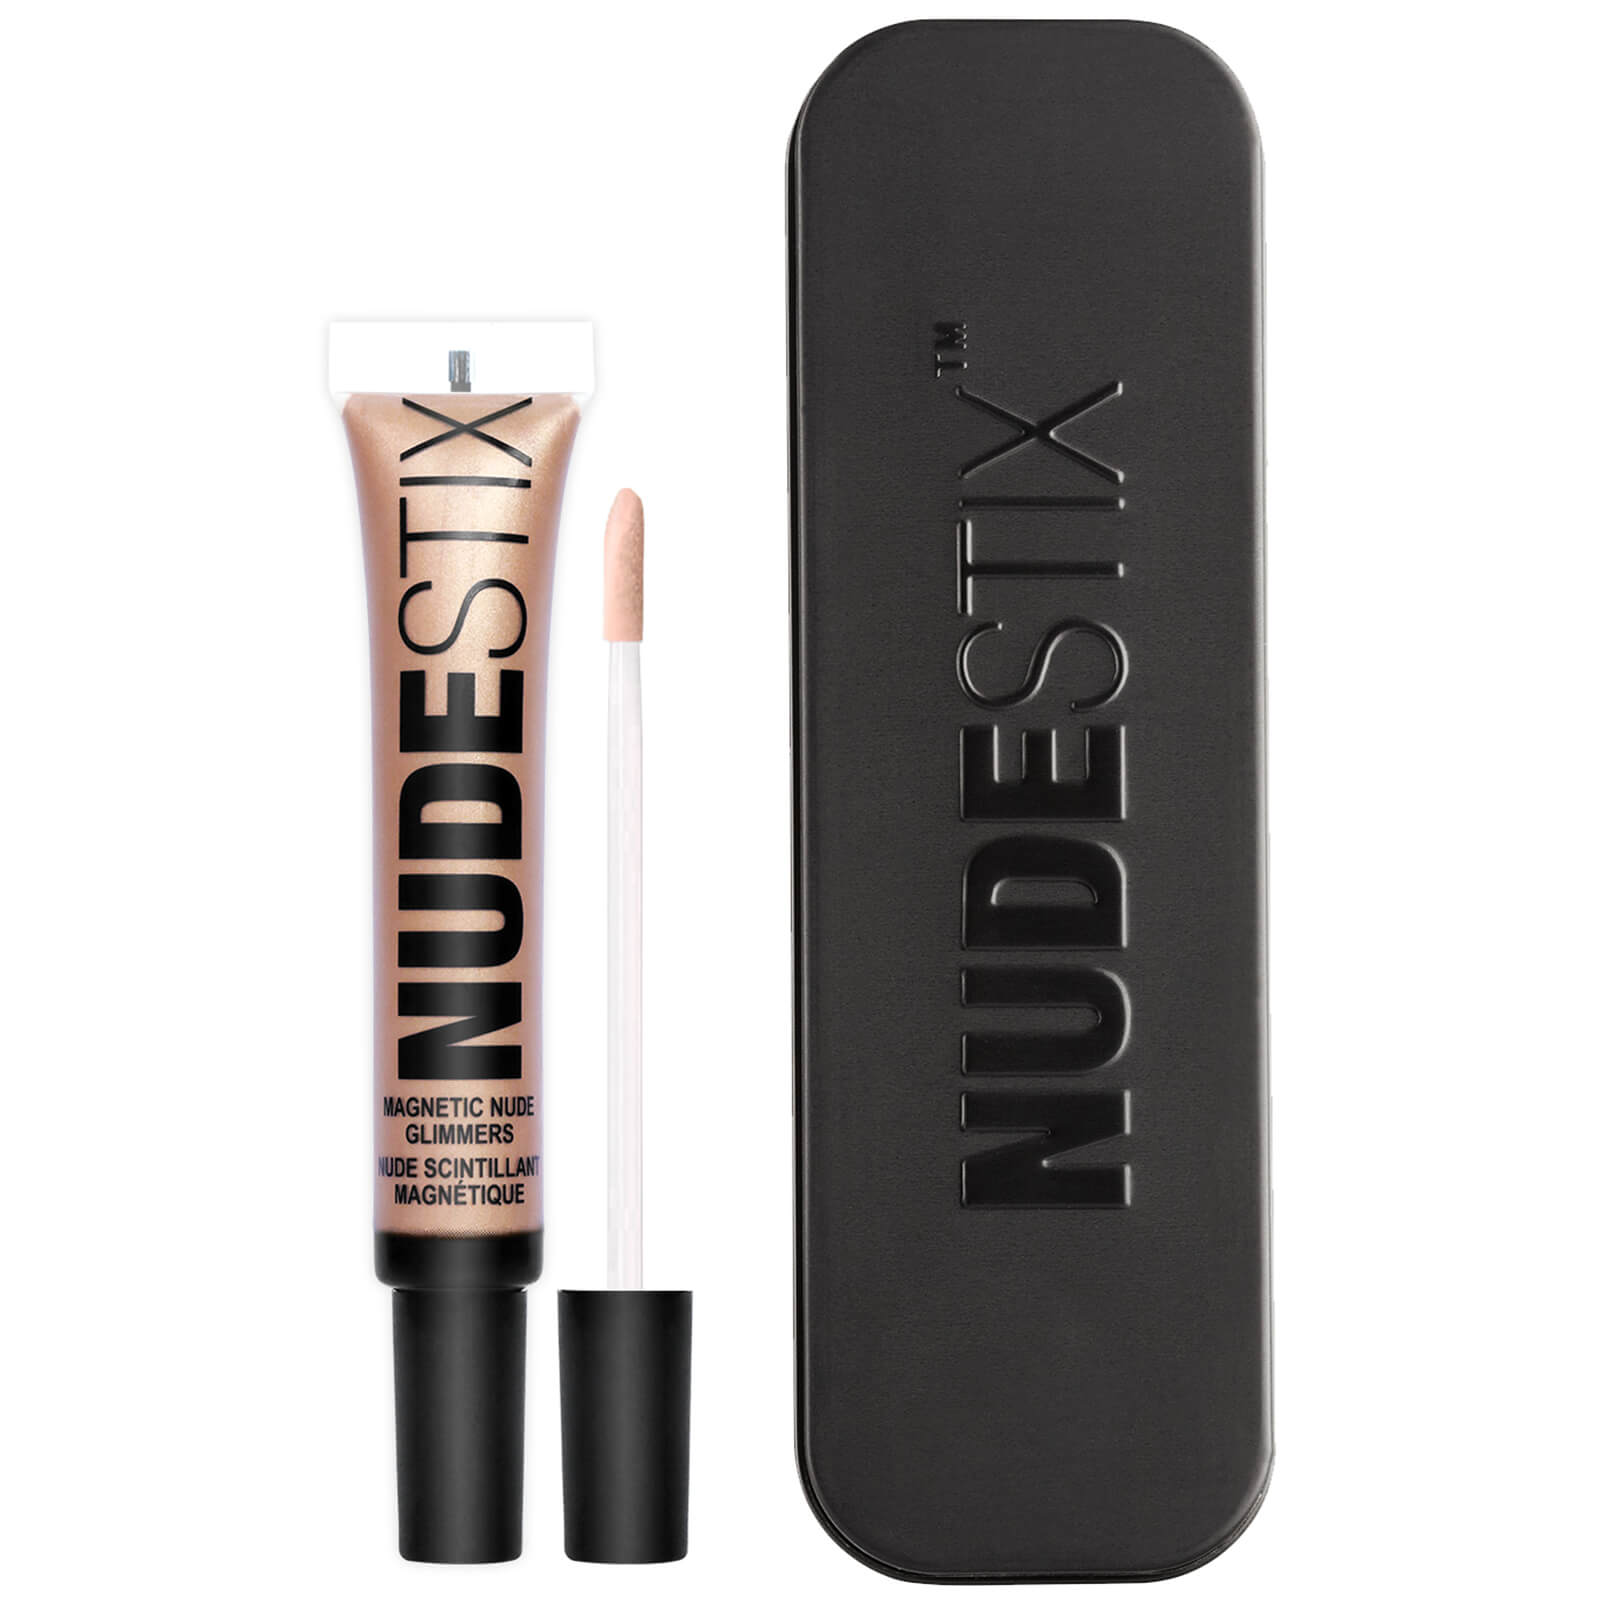 NUDESTIX MAGNETIC NUDE GLIMMER (VARIOUS SHADES),NMNG99A